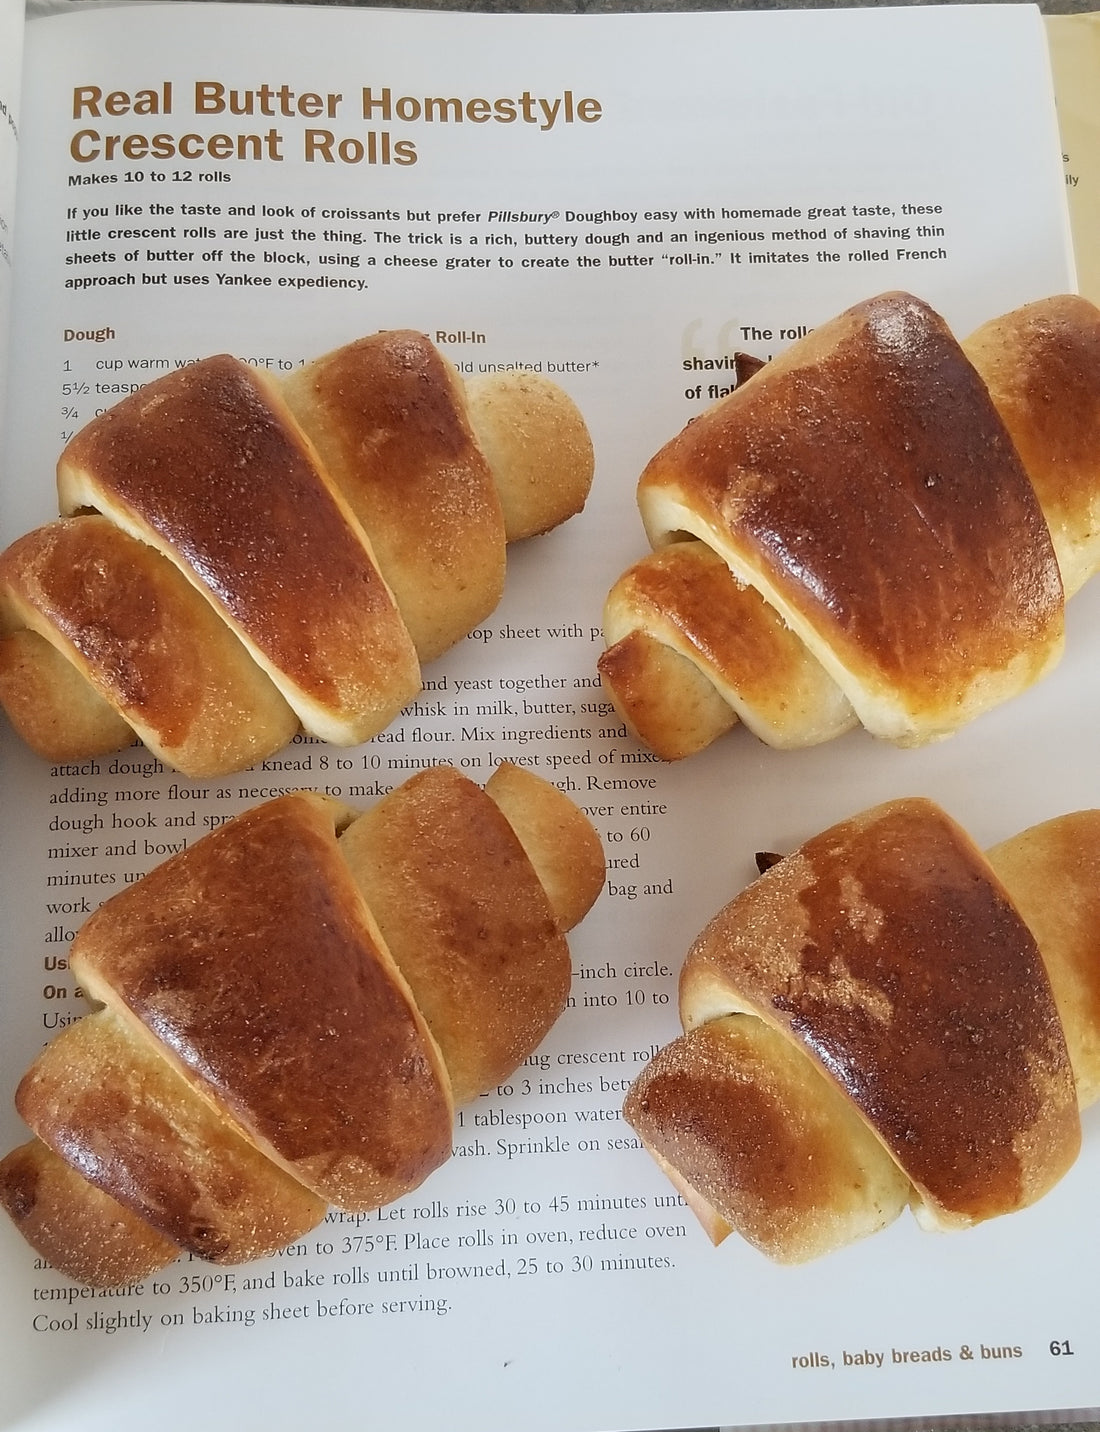 Real Butter Homestyle Crescent Rolls